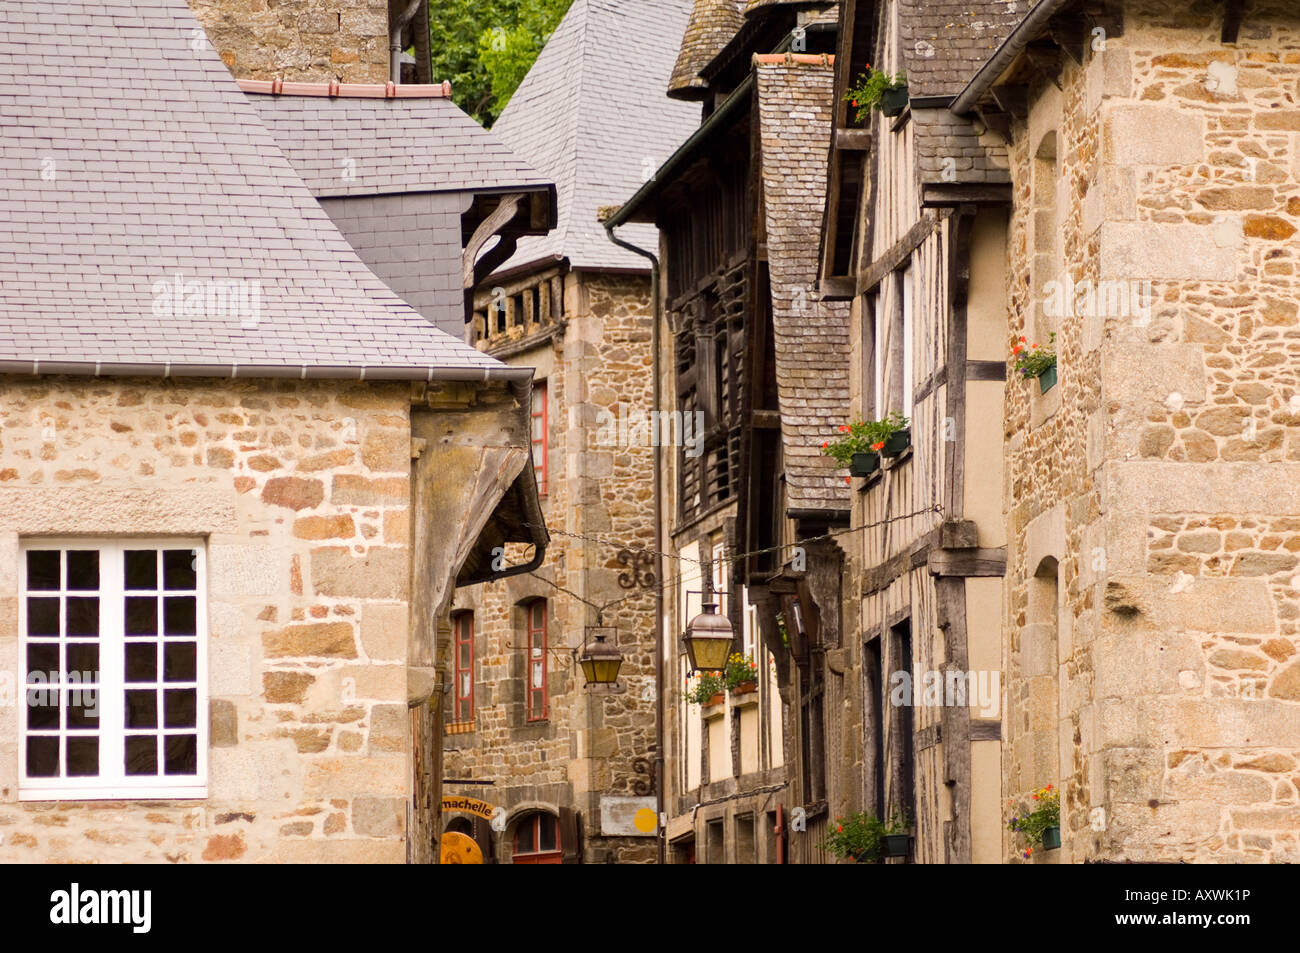 Old half timbered and stone buildings in the picturesque village of Dinan, Brittany, France, Europe Stock Photo